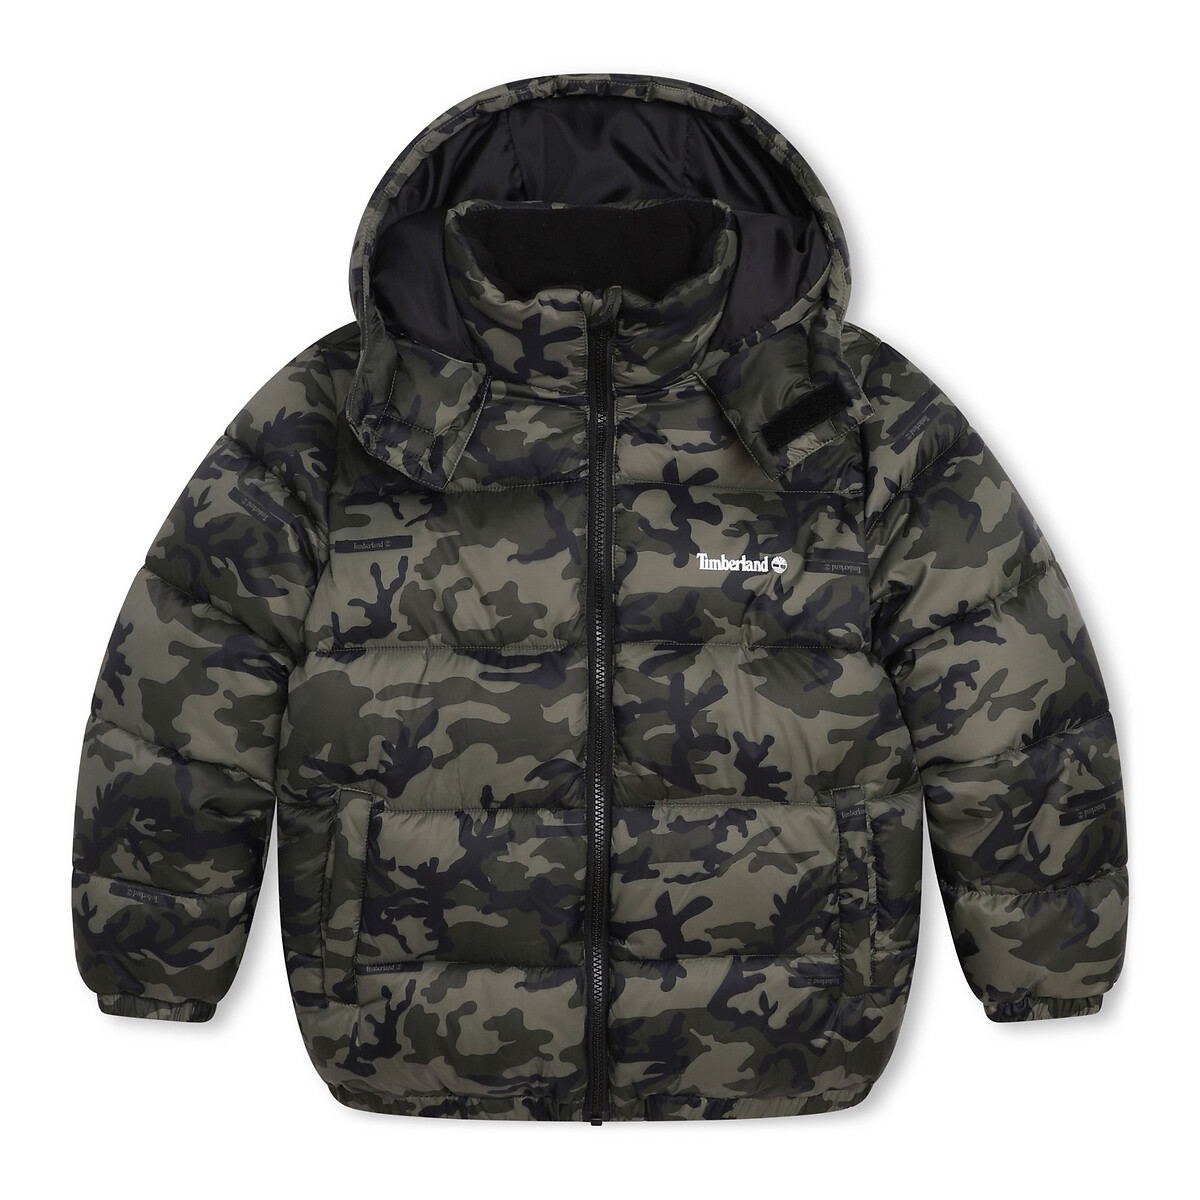 Image of Hooded Padded Jacket in Camo Print